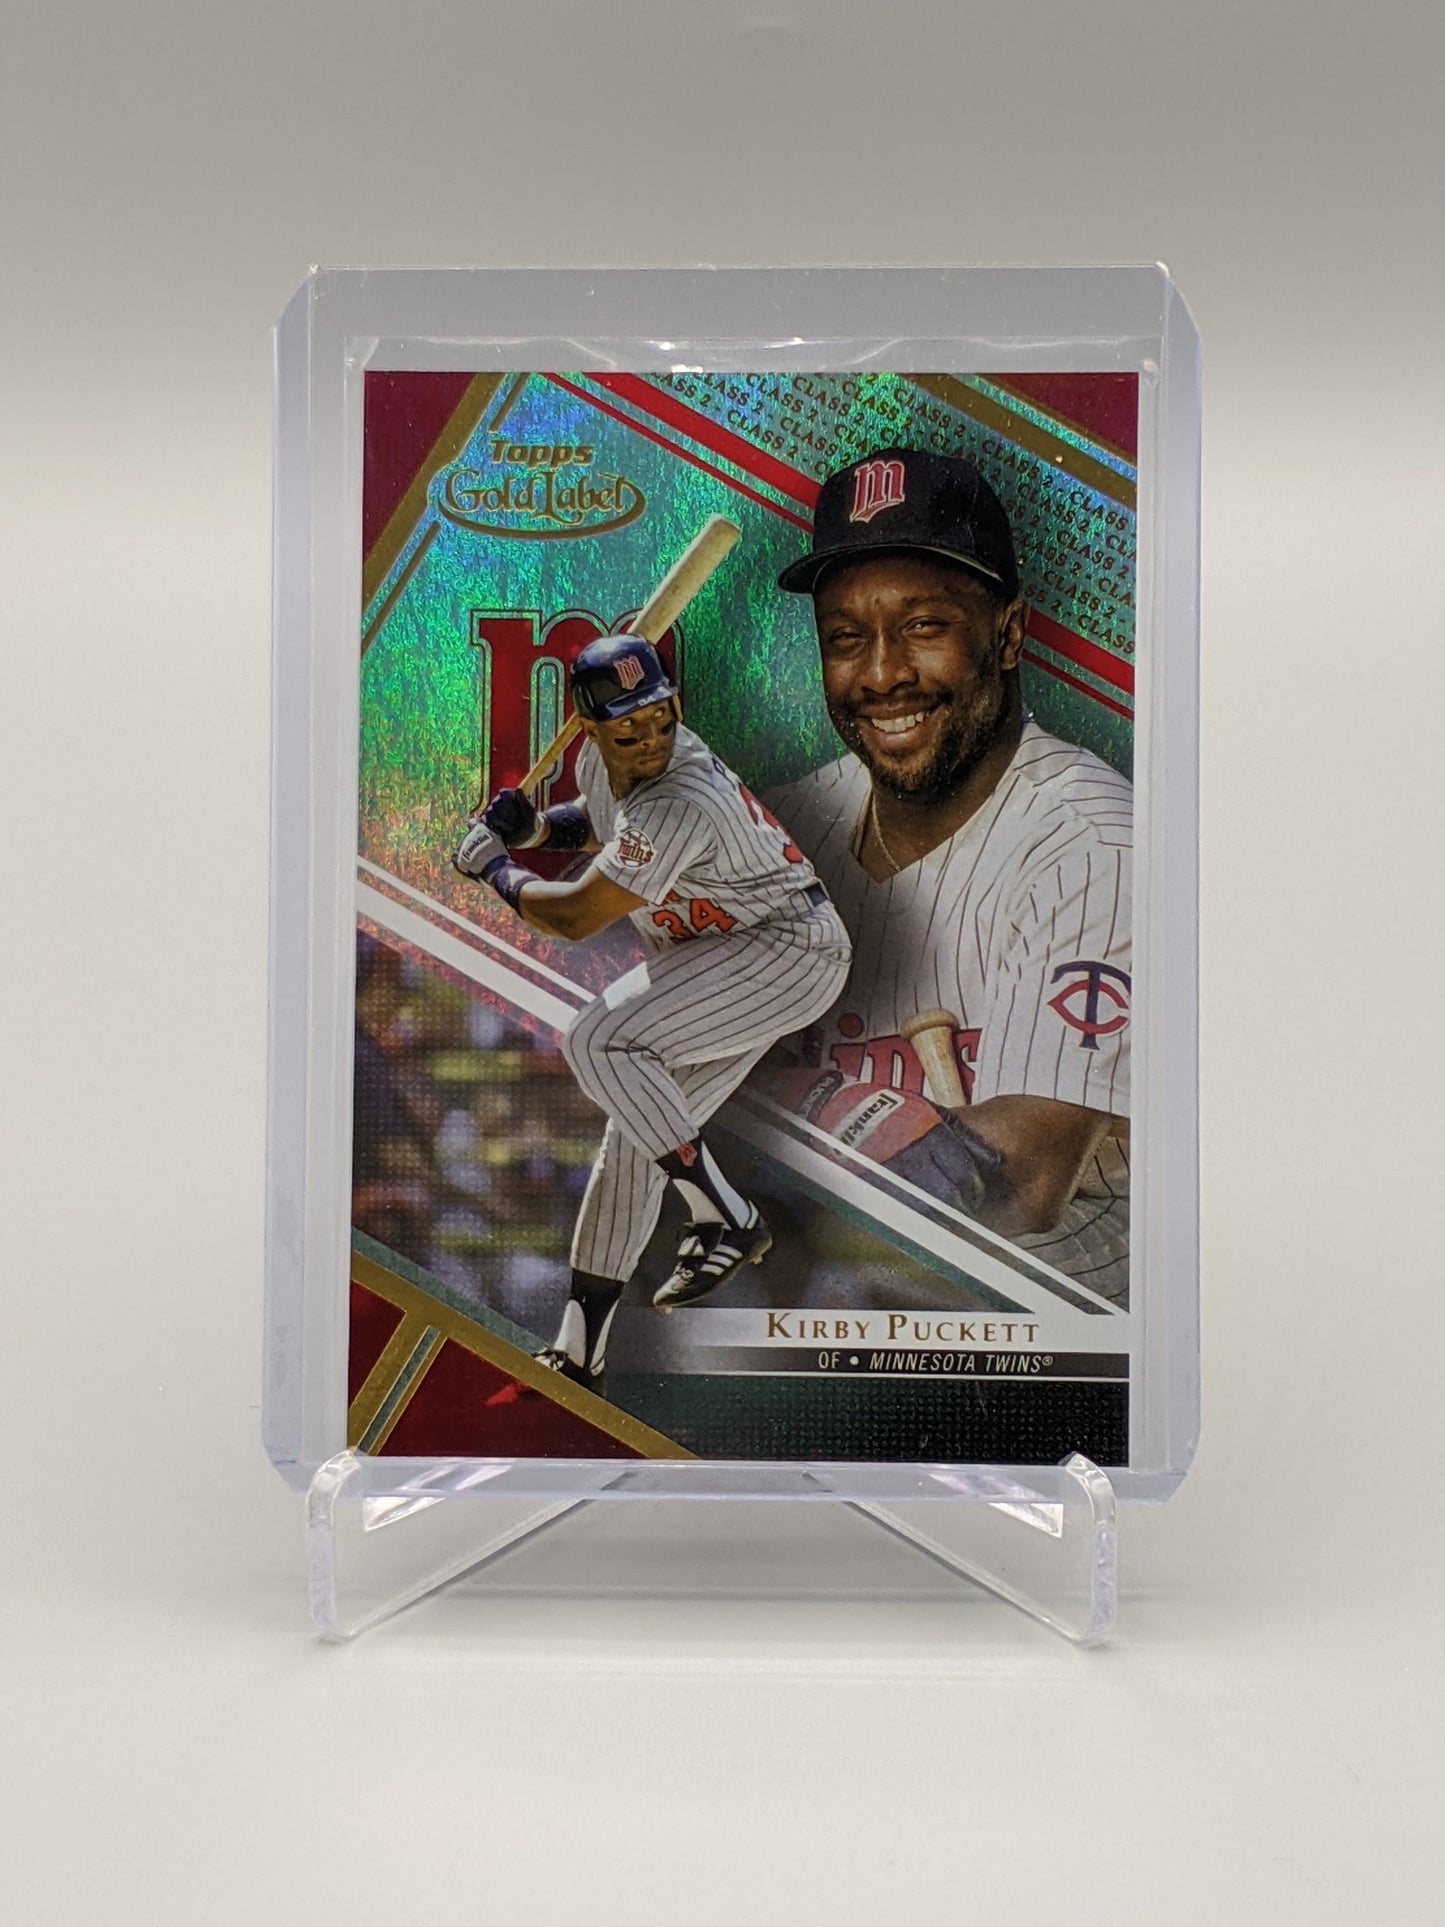 2021 Topps Gold Label Class 2 Red Kirby Puckett #/50 Twins